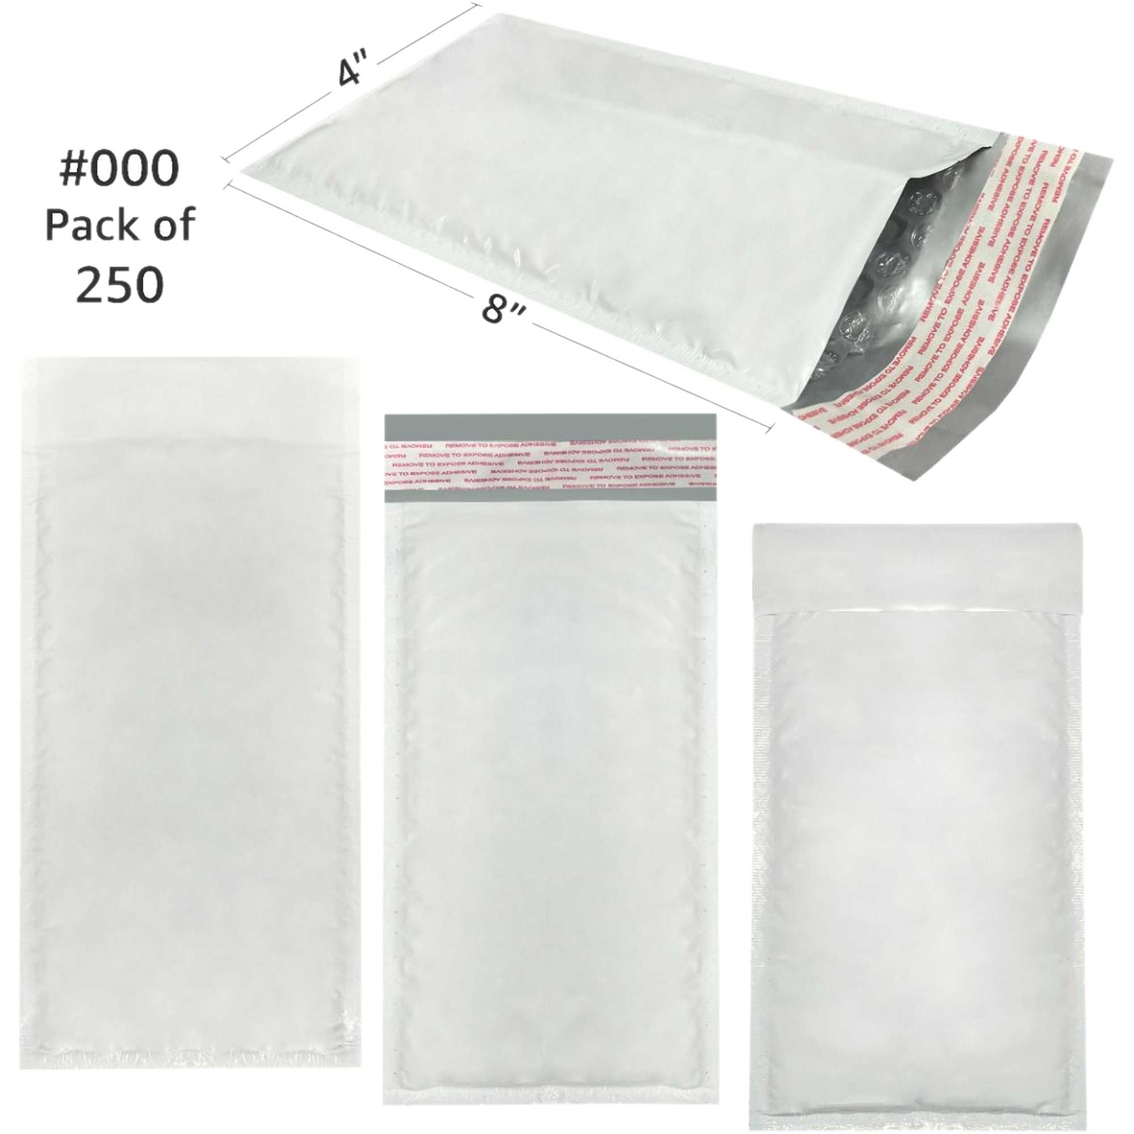 uBoxes Poly Bubble Mailer 4  in. X 8  in. #000- Pack of 250 - Image 4 of 4